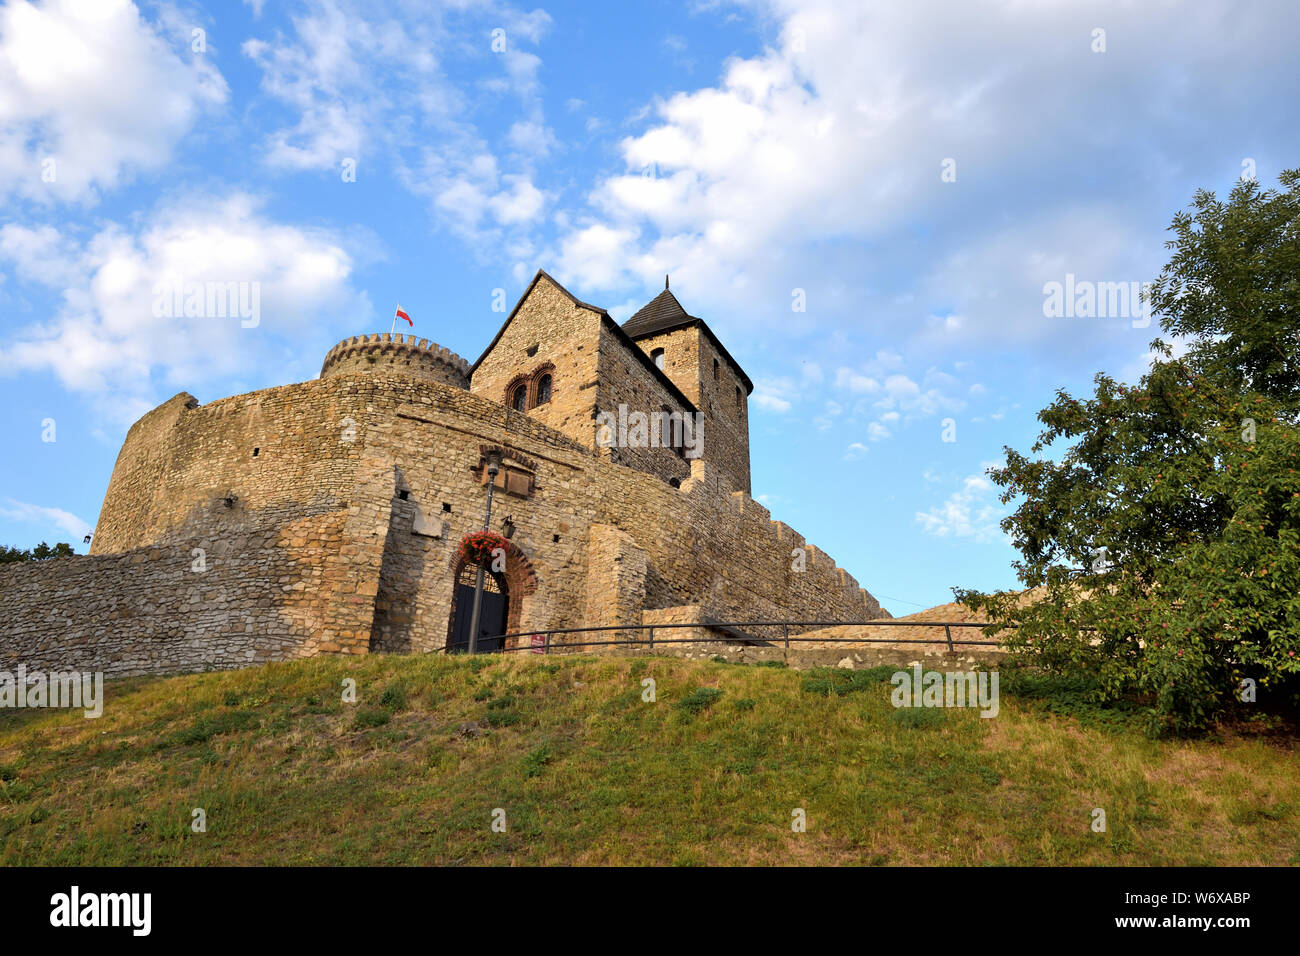 Medieval Bedzin Castle in southern Poland. The stone fortification dates to the 14th century. Europe Stock Photo